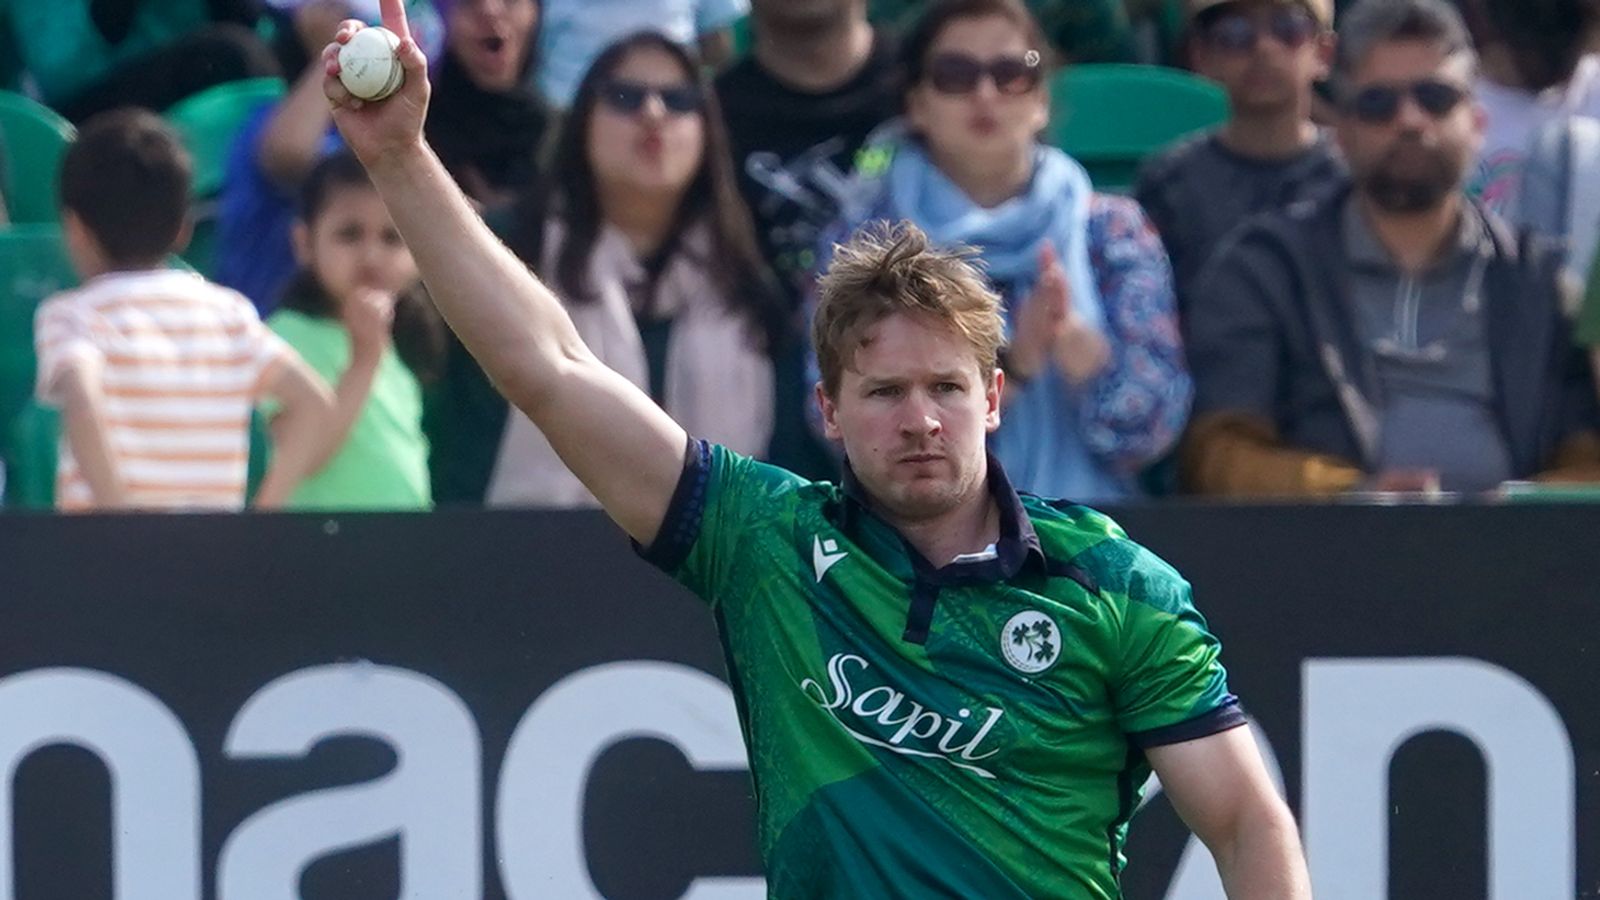 Ireland secure first victory over Pakistan in 15 years with five wicket win in Dublin